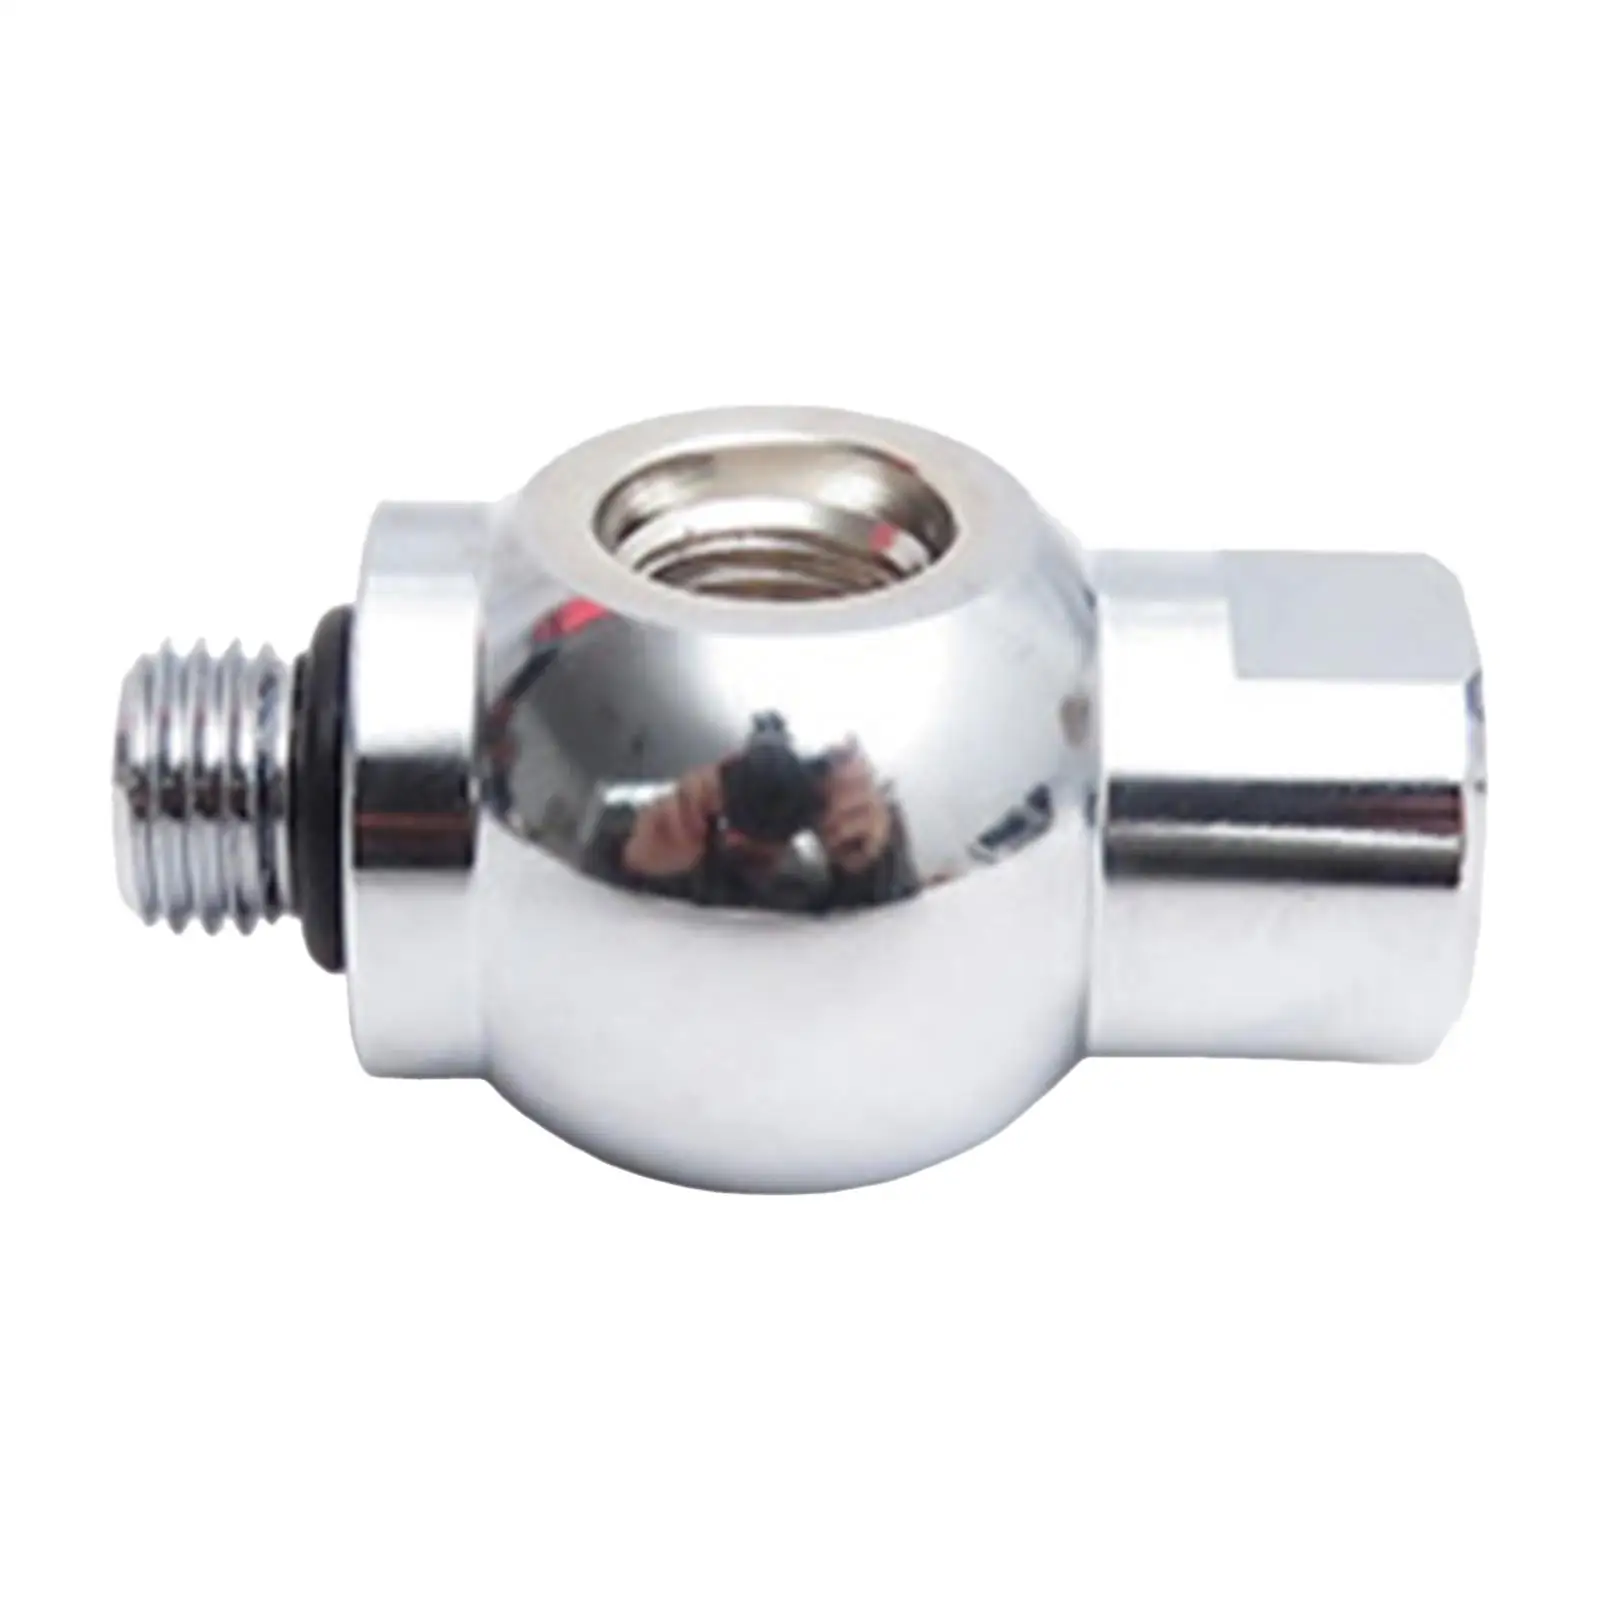 Scuba Diving Regulator Adapter Plated Brass Heavy Duty for Replacement Parts Repair